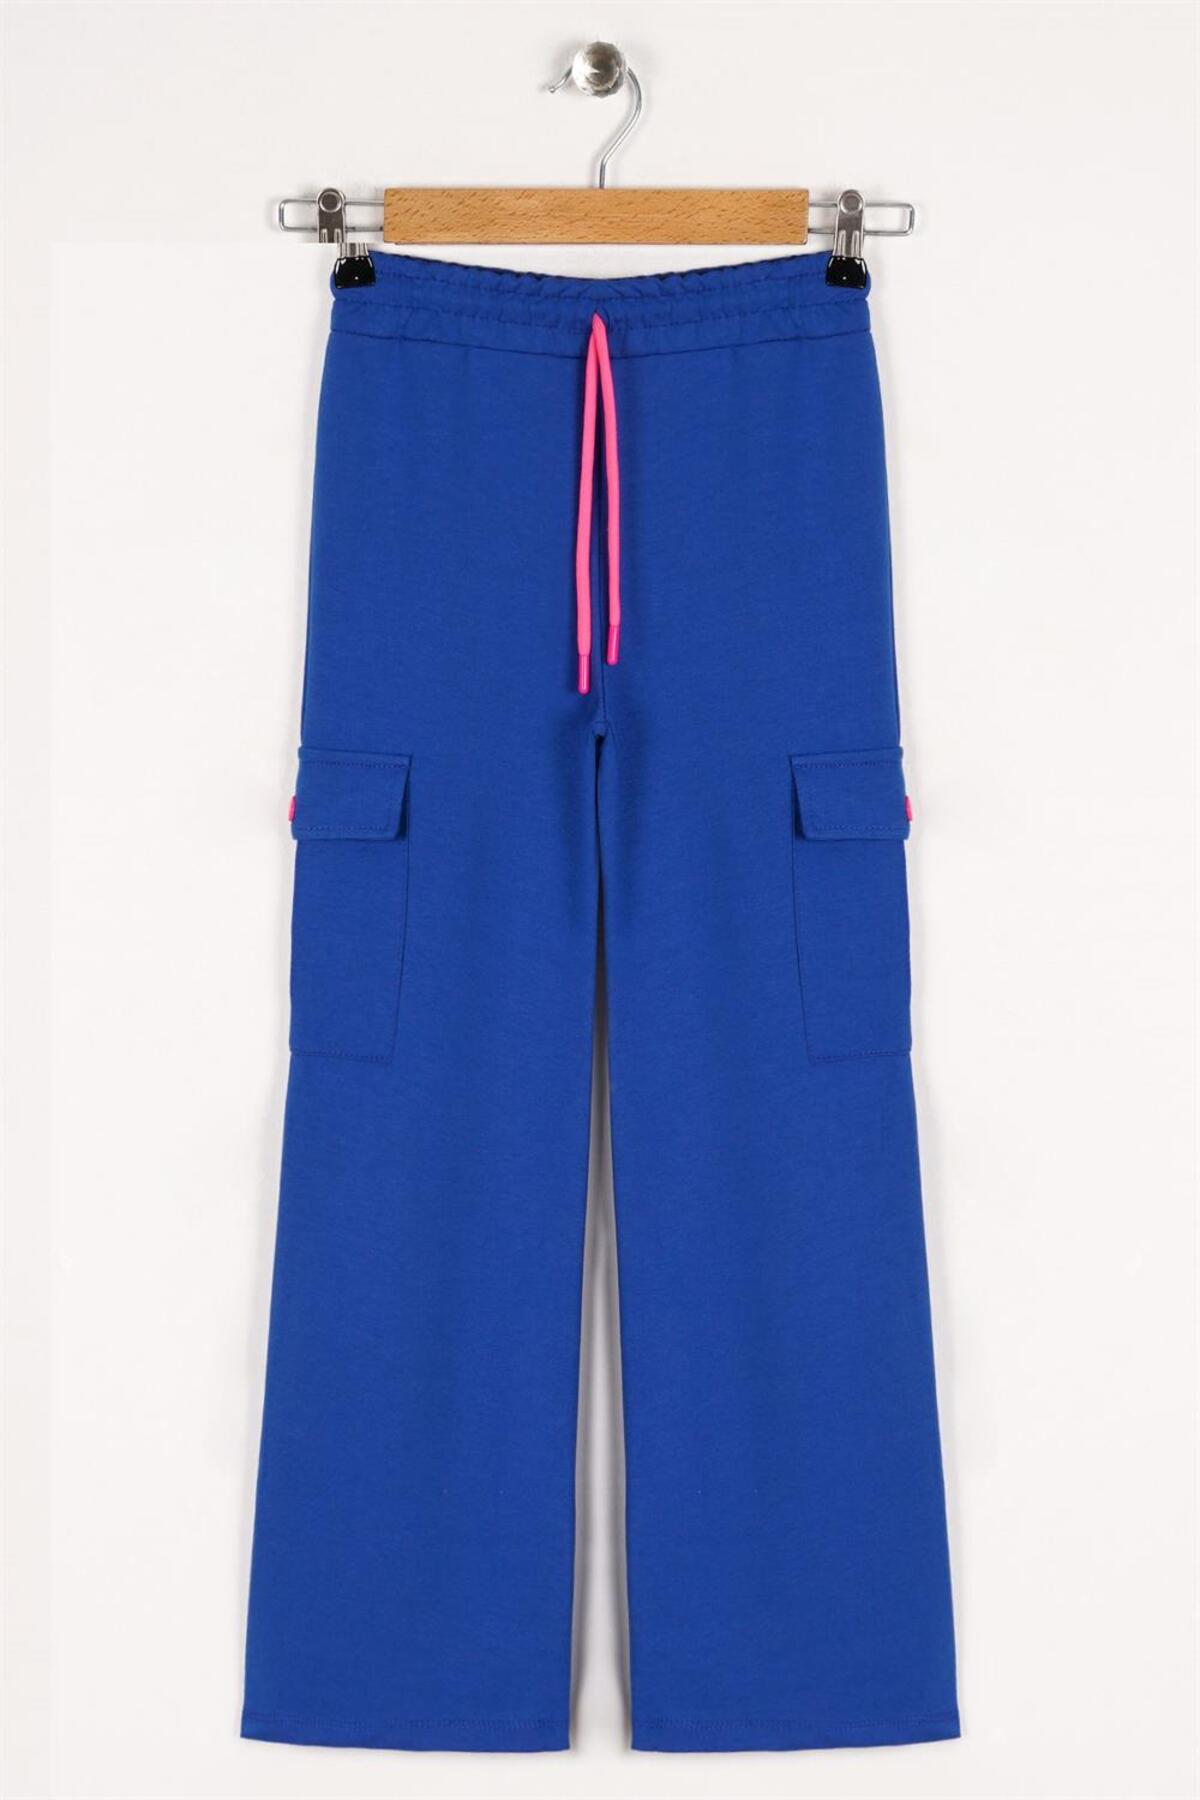 Levně zepkids Girls' Sax-colored sweatpants with cargo pockets and wide legs.